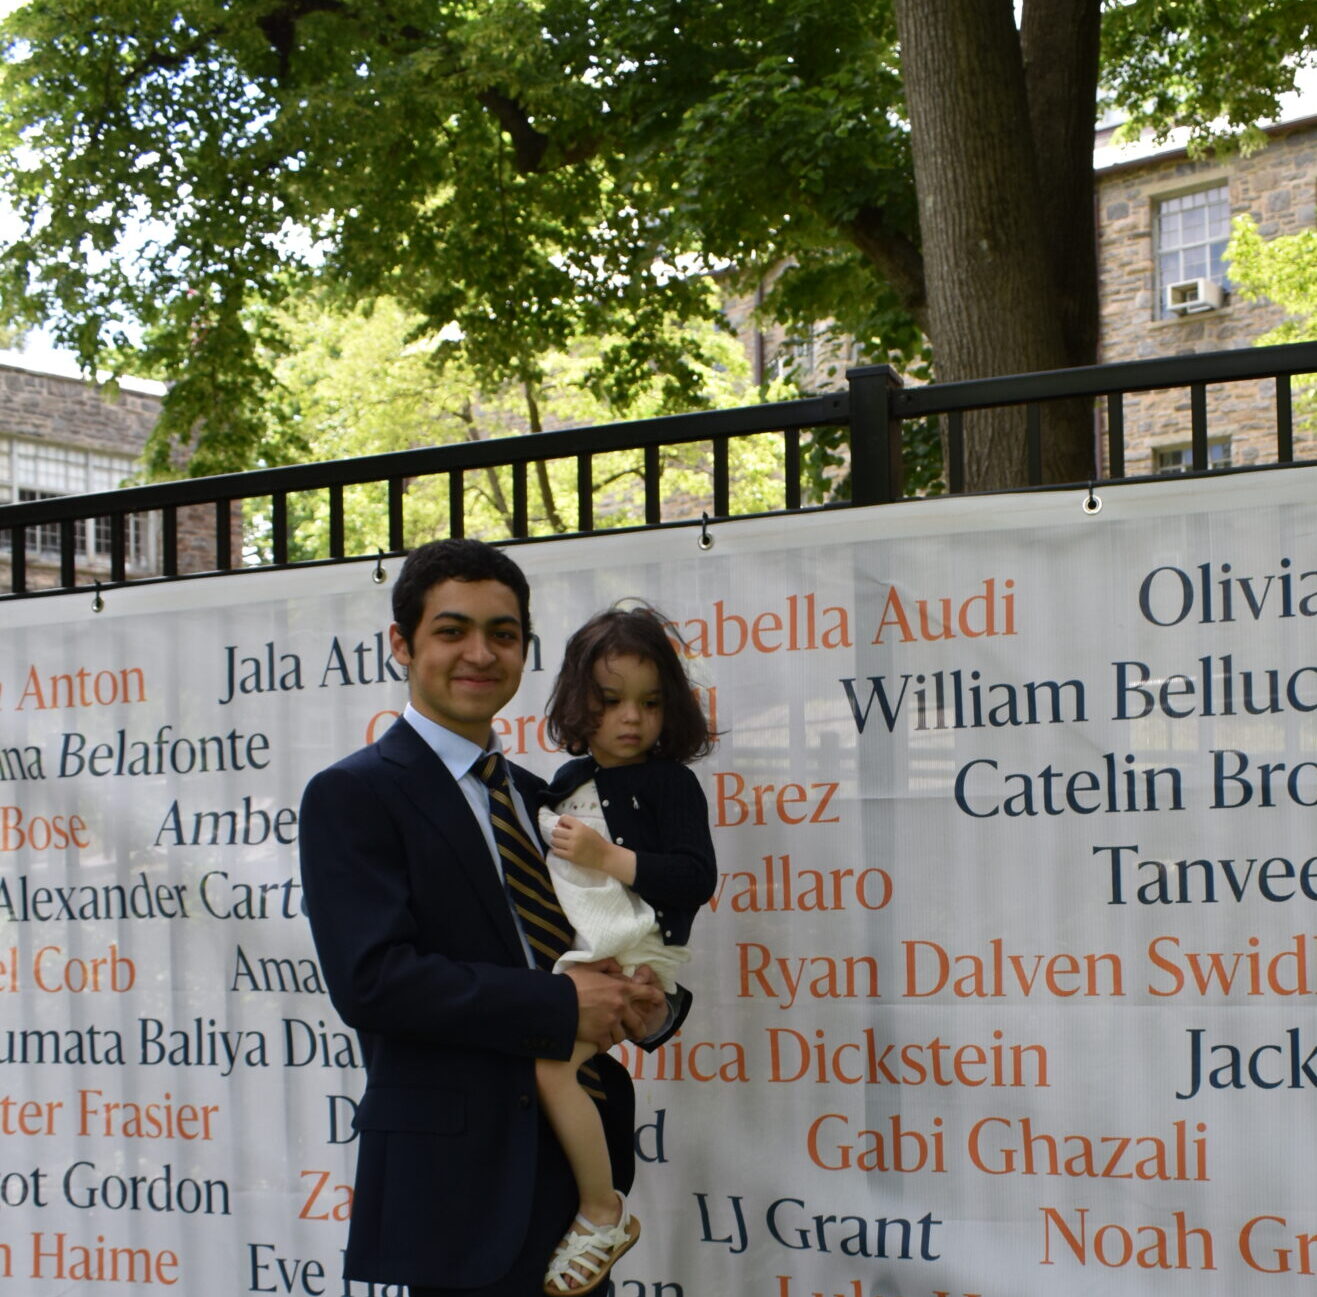 Gabi Ghazali poses in front of his name on a banner showing the names of ECFS's graduating class.